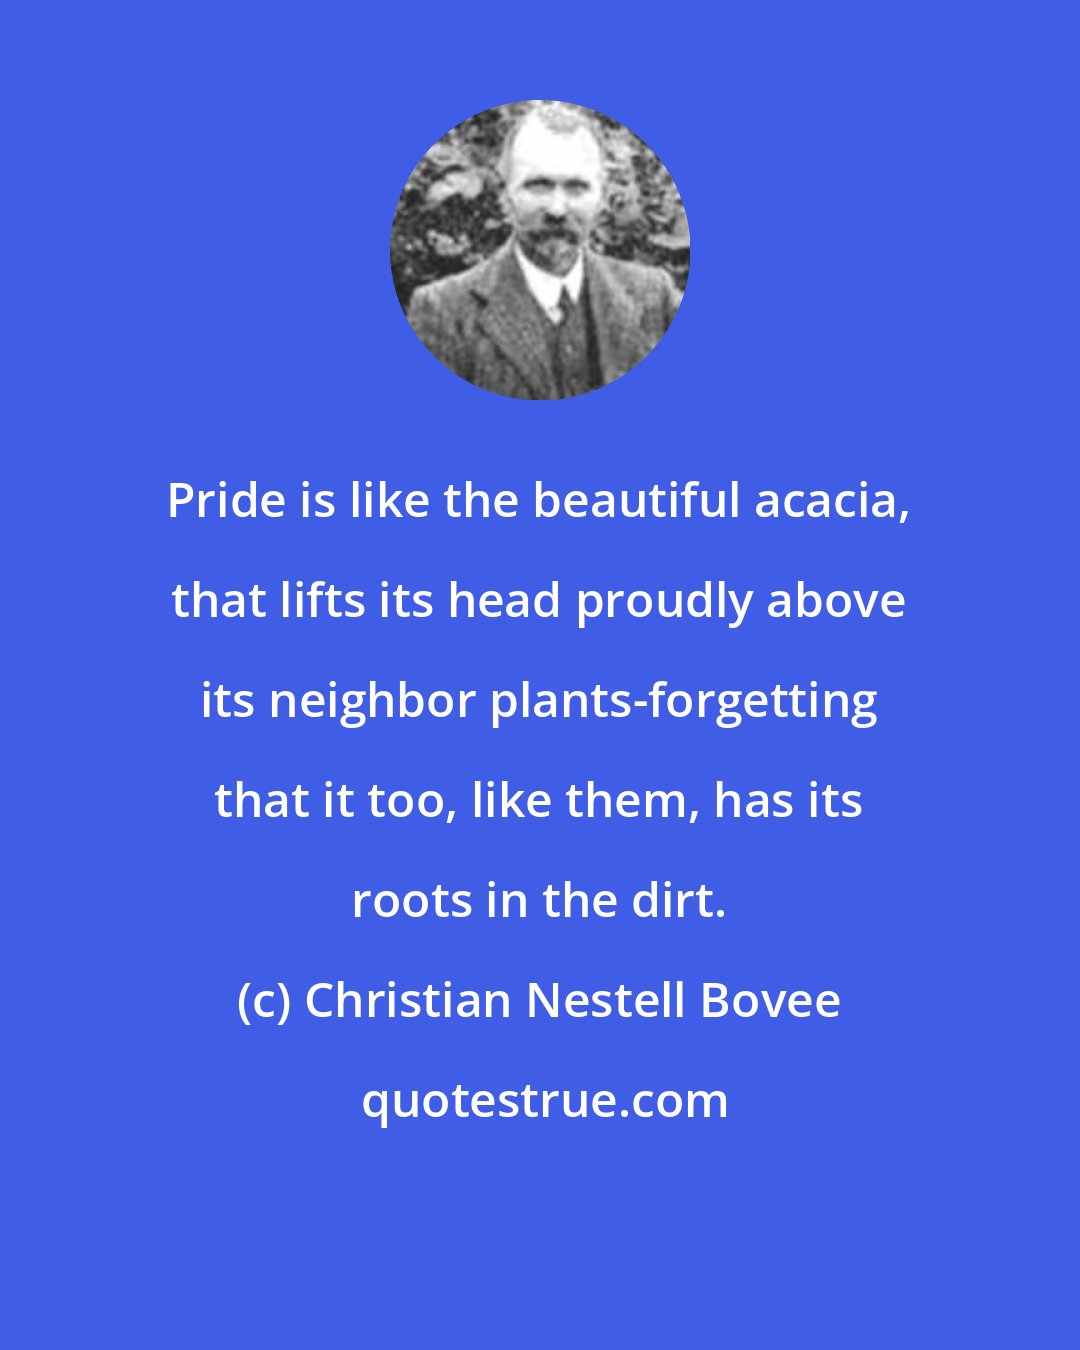 Christian Nestell Bovee: Pride is like the beautiful acacia, that lifts its head proudly above its neighbor plants-forgetting that it too, like them, has its roots in the dirt.